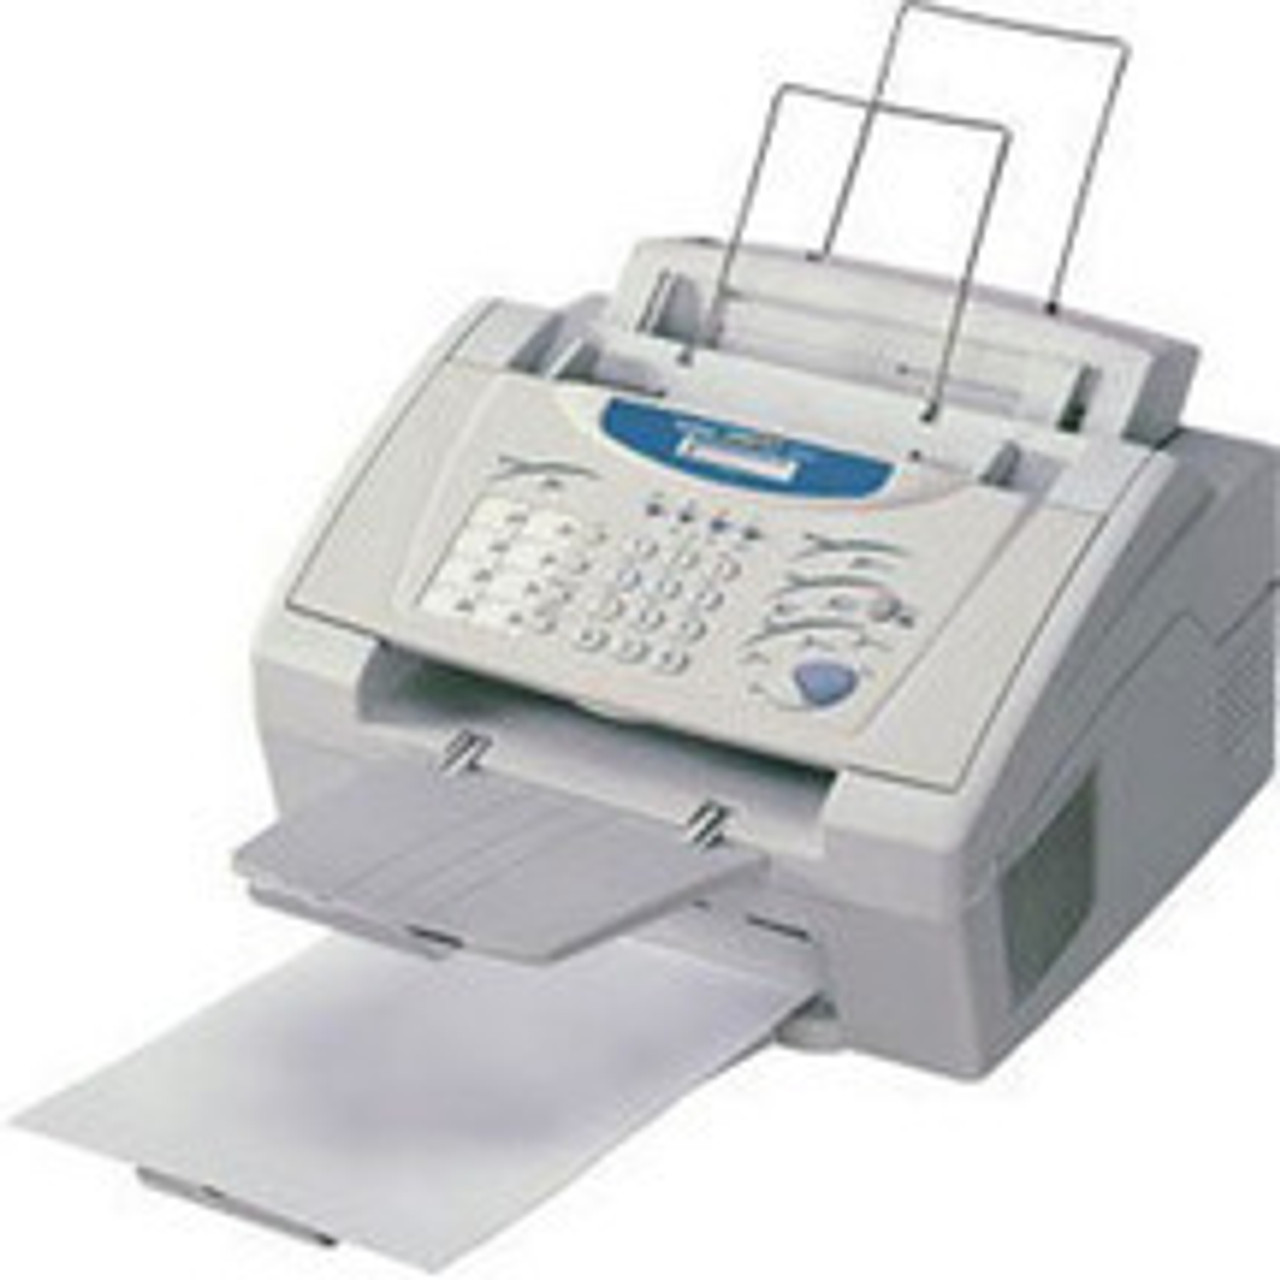 Brother Intellifax 2600